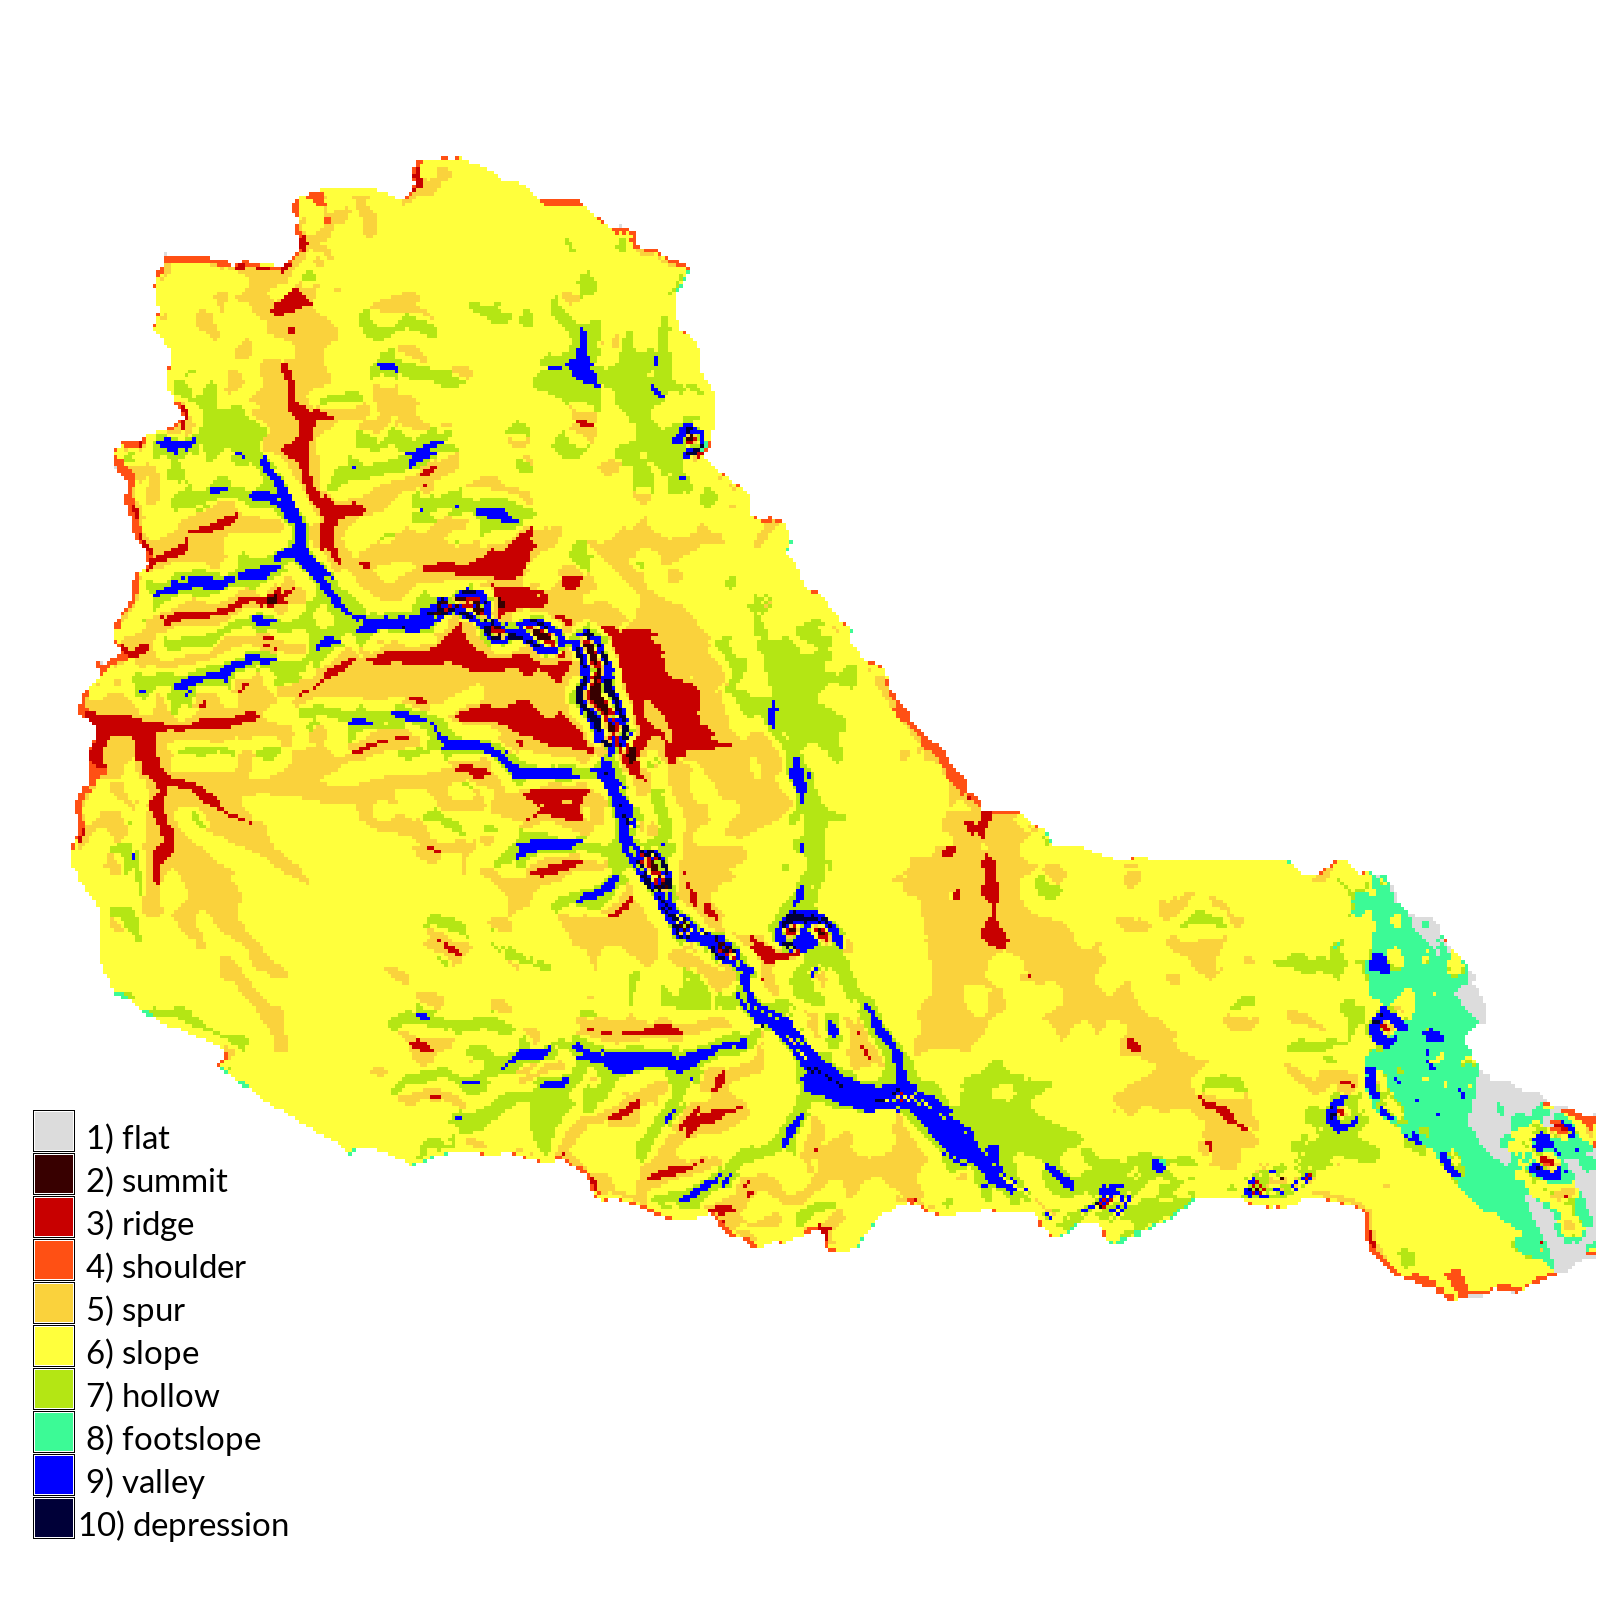 Landforms simulated by SIMWE after a 50 mm/hr rainfall event lasting 120 min